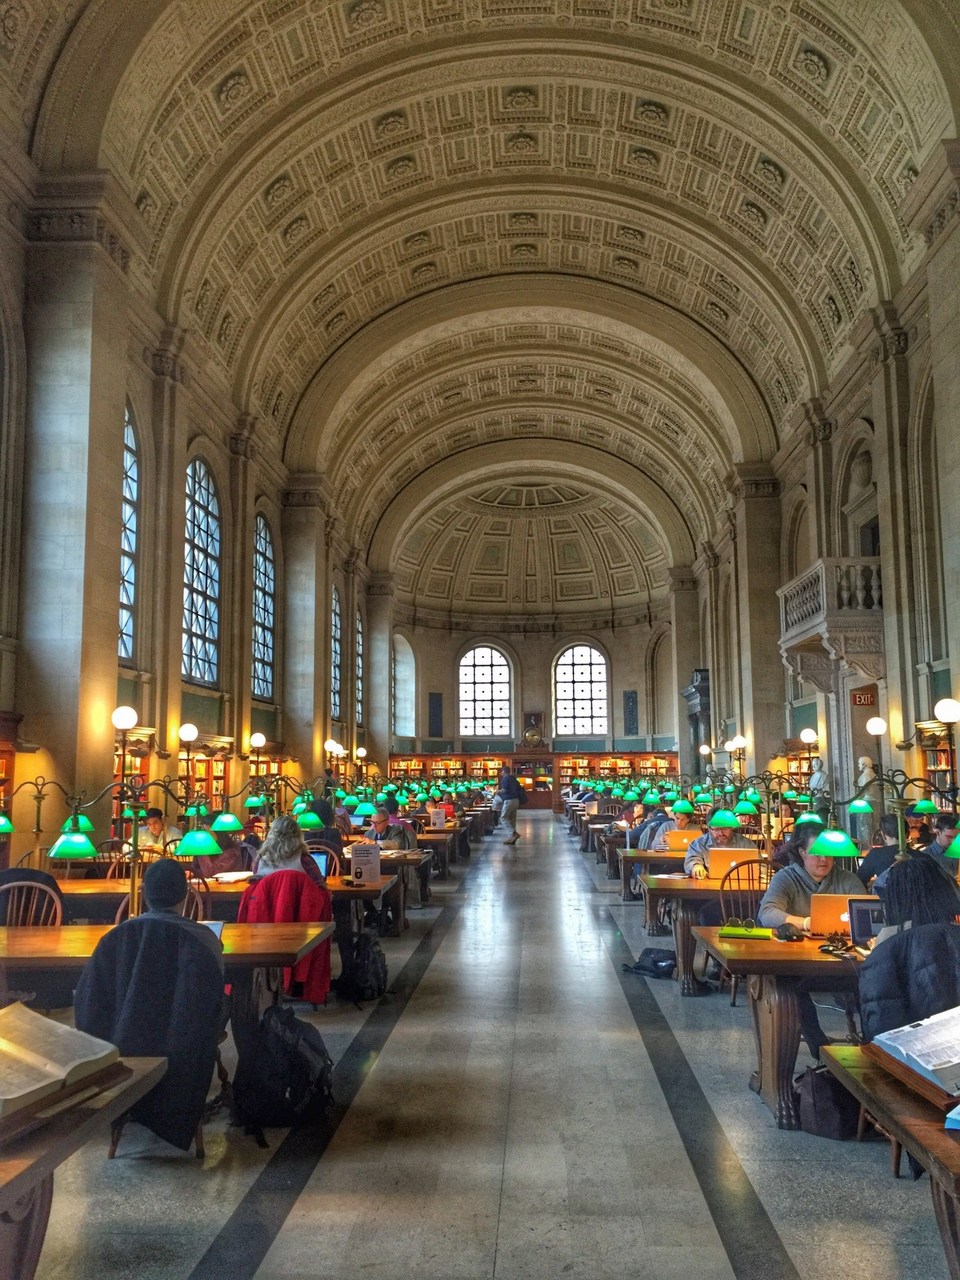 Inside the Boston public library is located in Copley Square